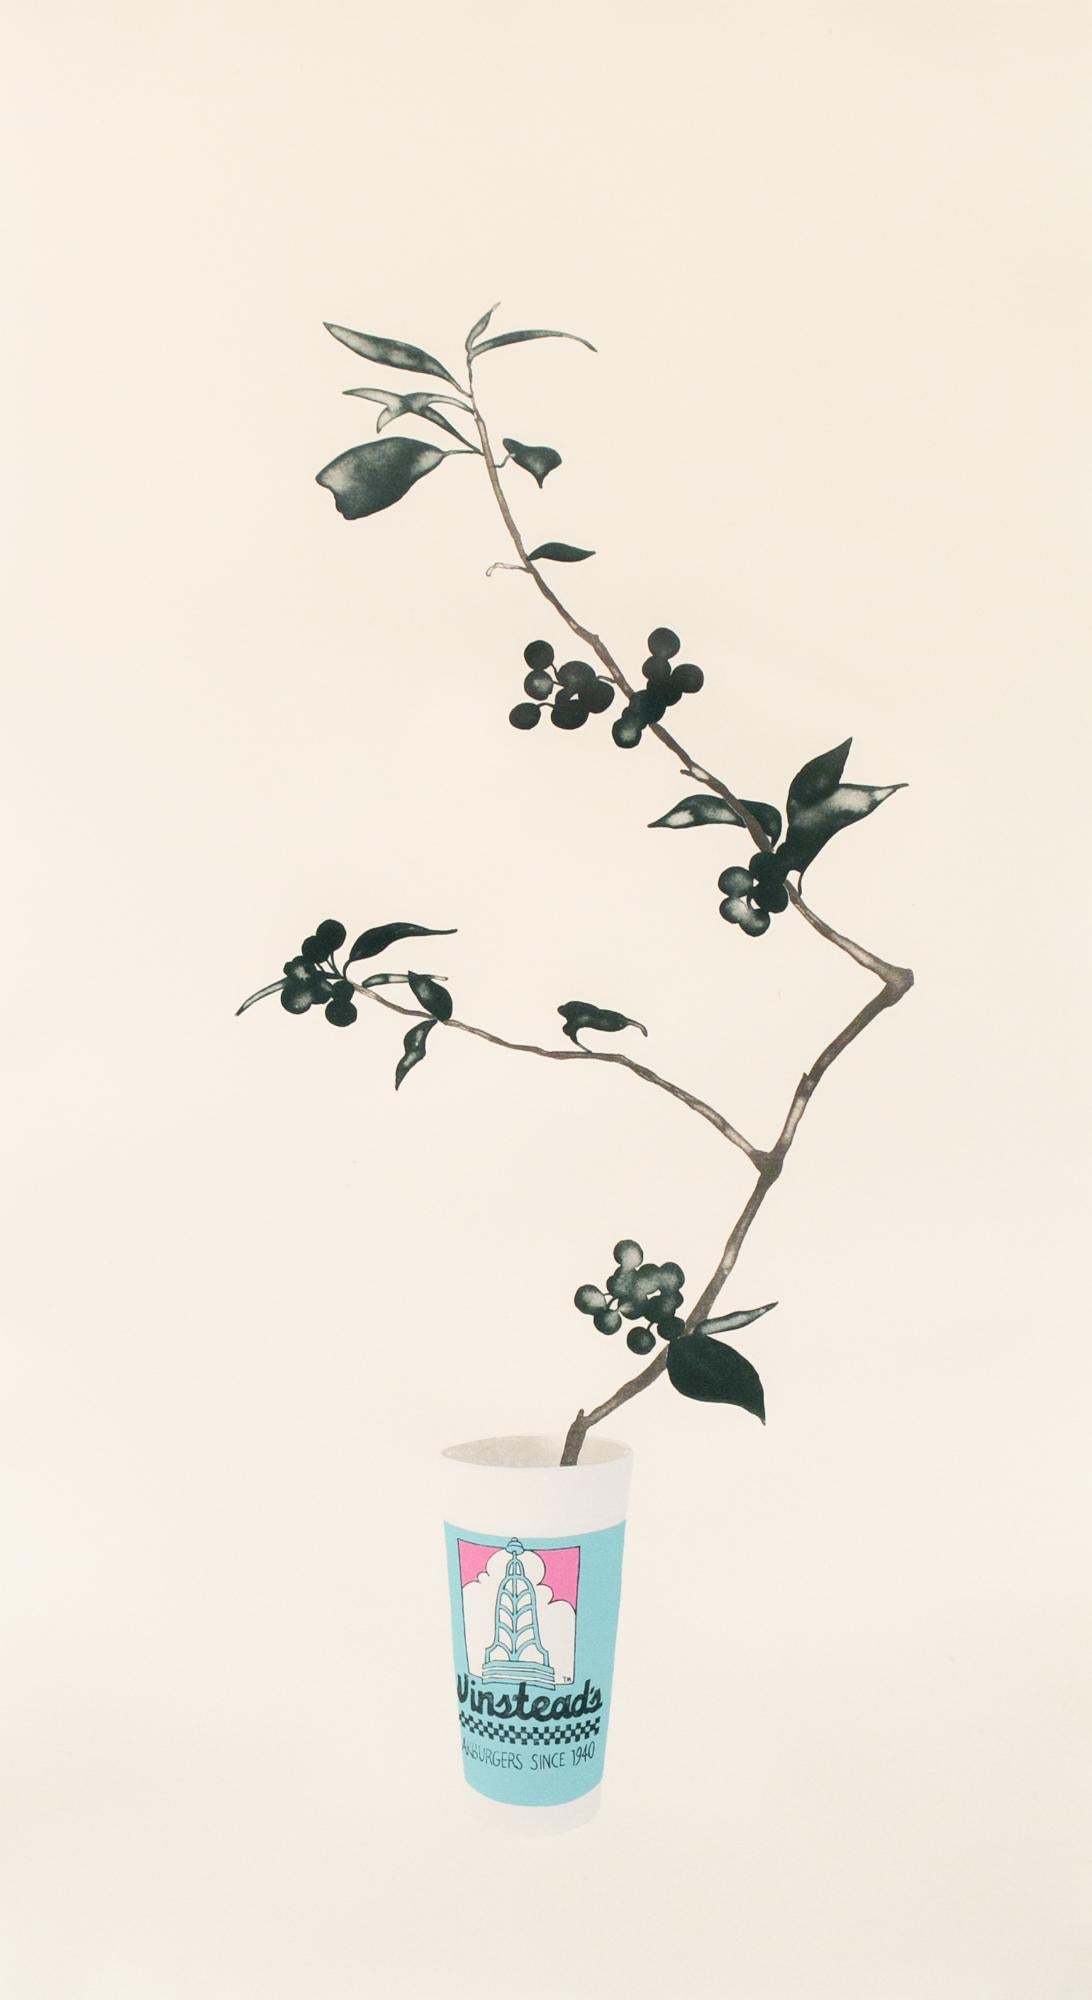 Yoonmi Nam Figurative Print - "Winstead’s" Unframed, Lithograph Print, Floral, Plant, Fast Food Cup